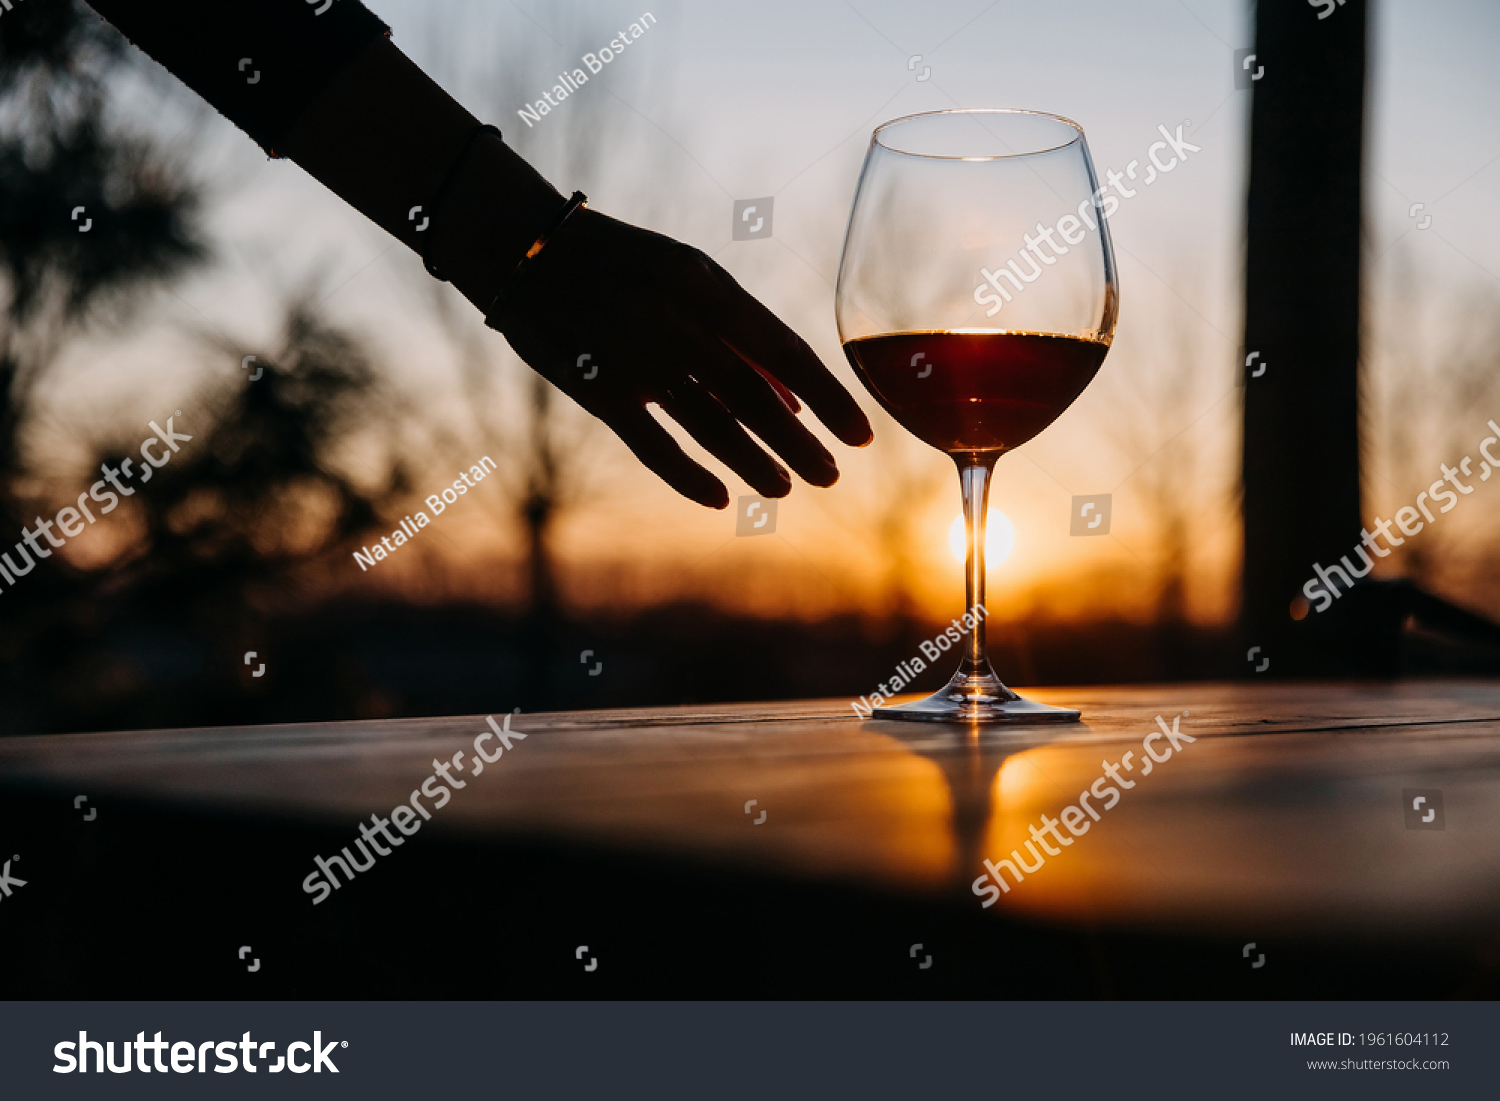 Female hand reaching a glass of red wine on a wooden table, at sunset. #1961604112